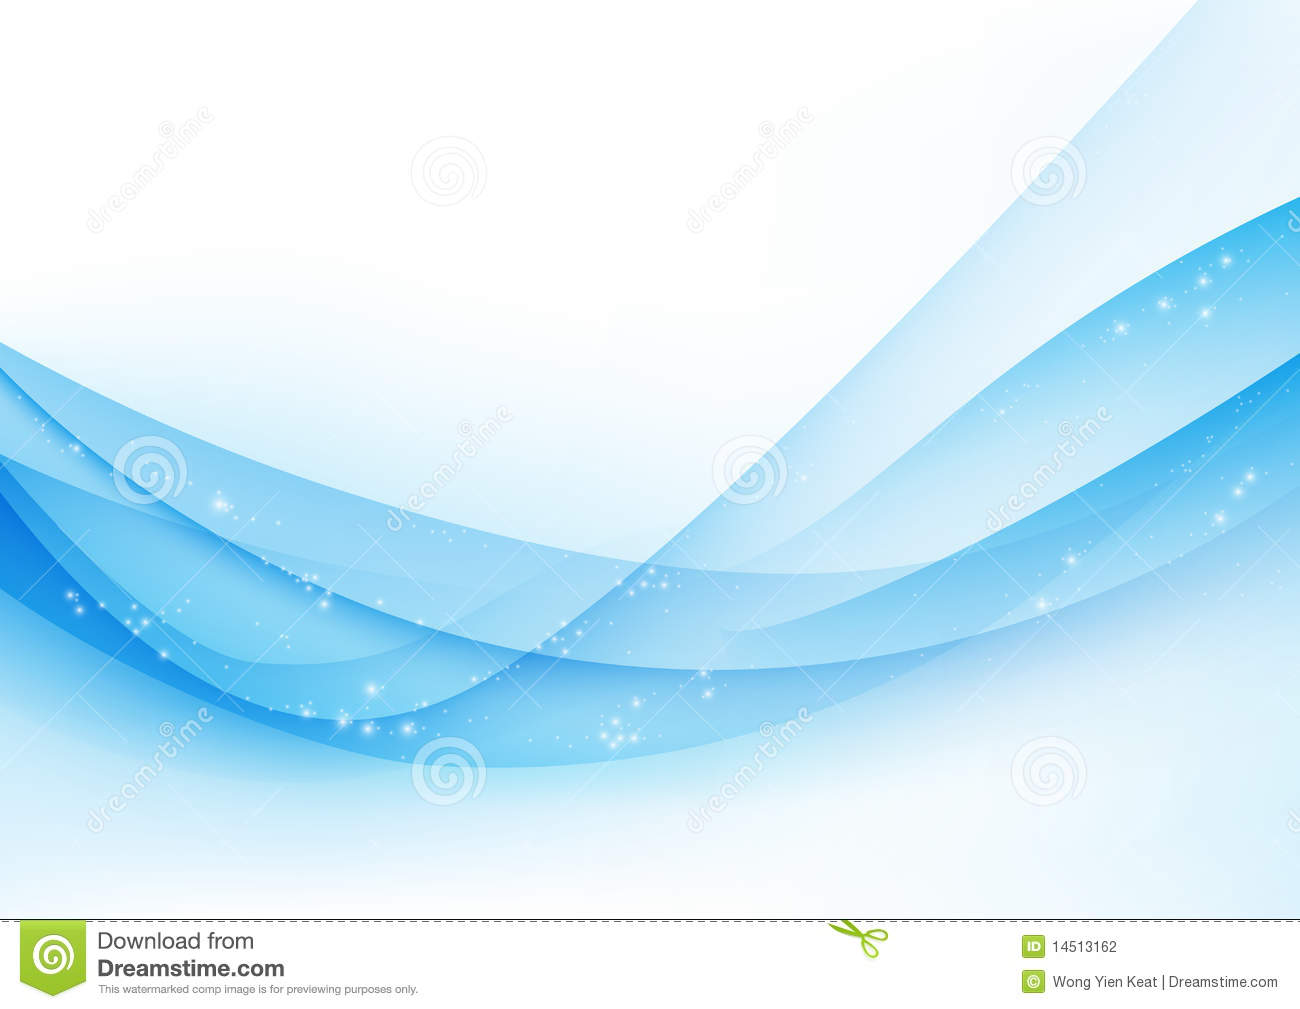 Abstract Wave Vector